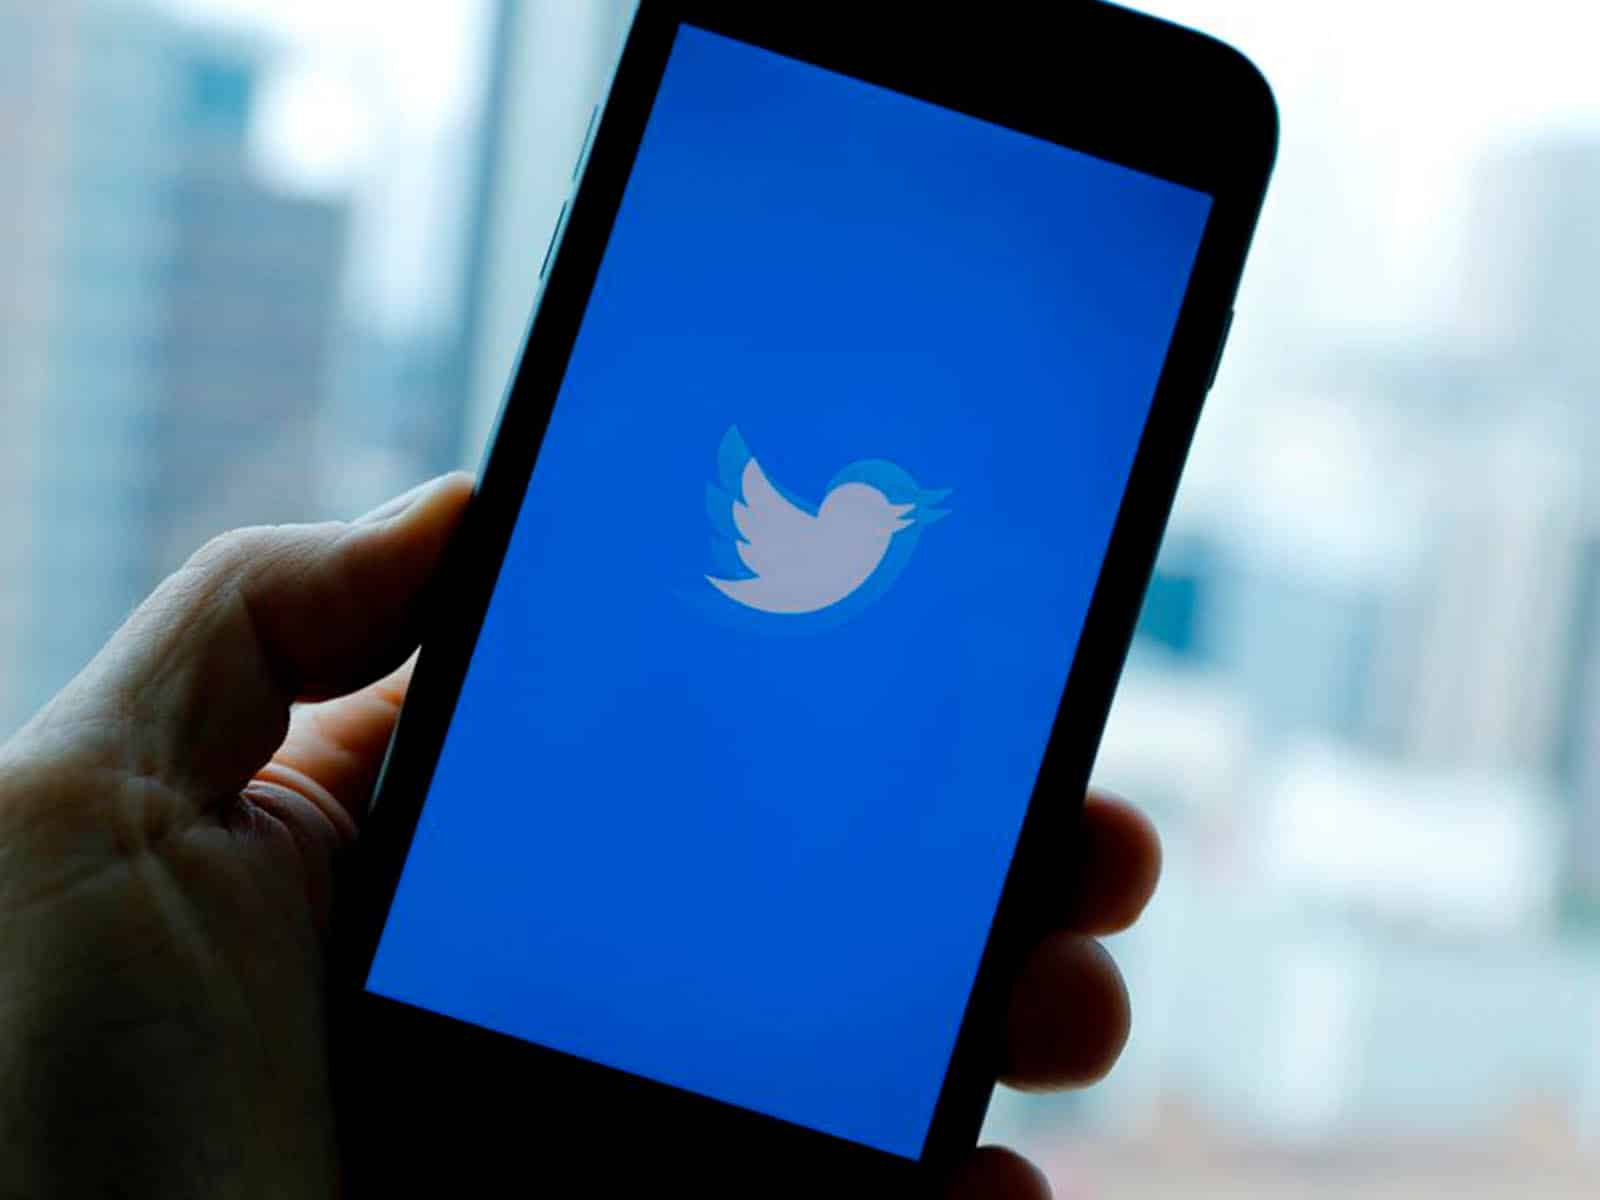 Editing your tweets on Twitter is finally a reality